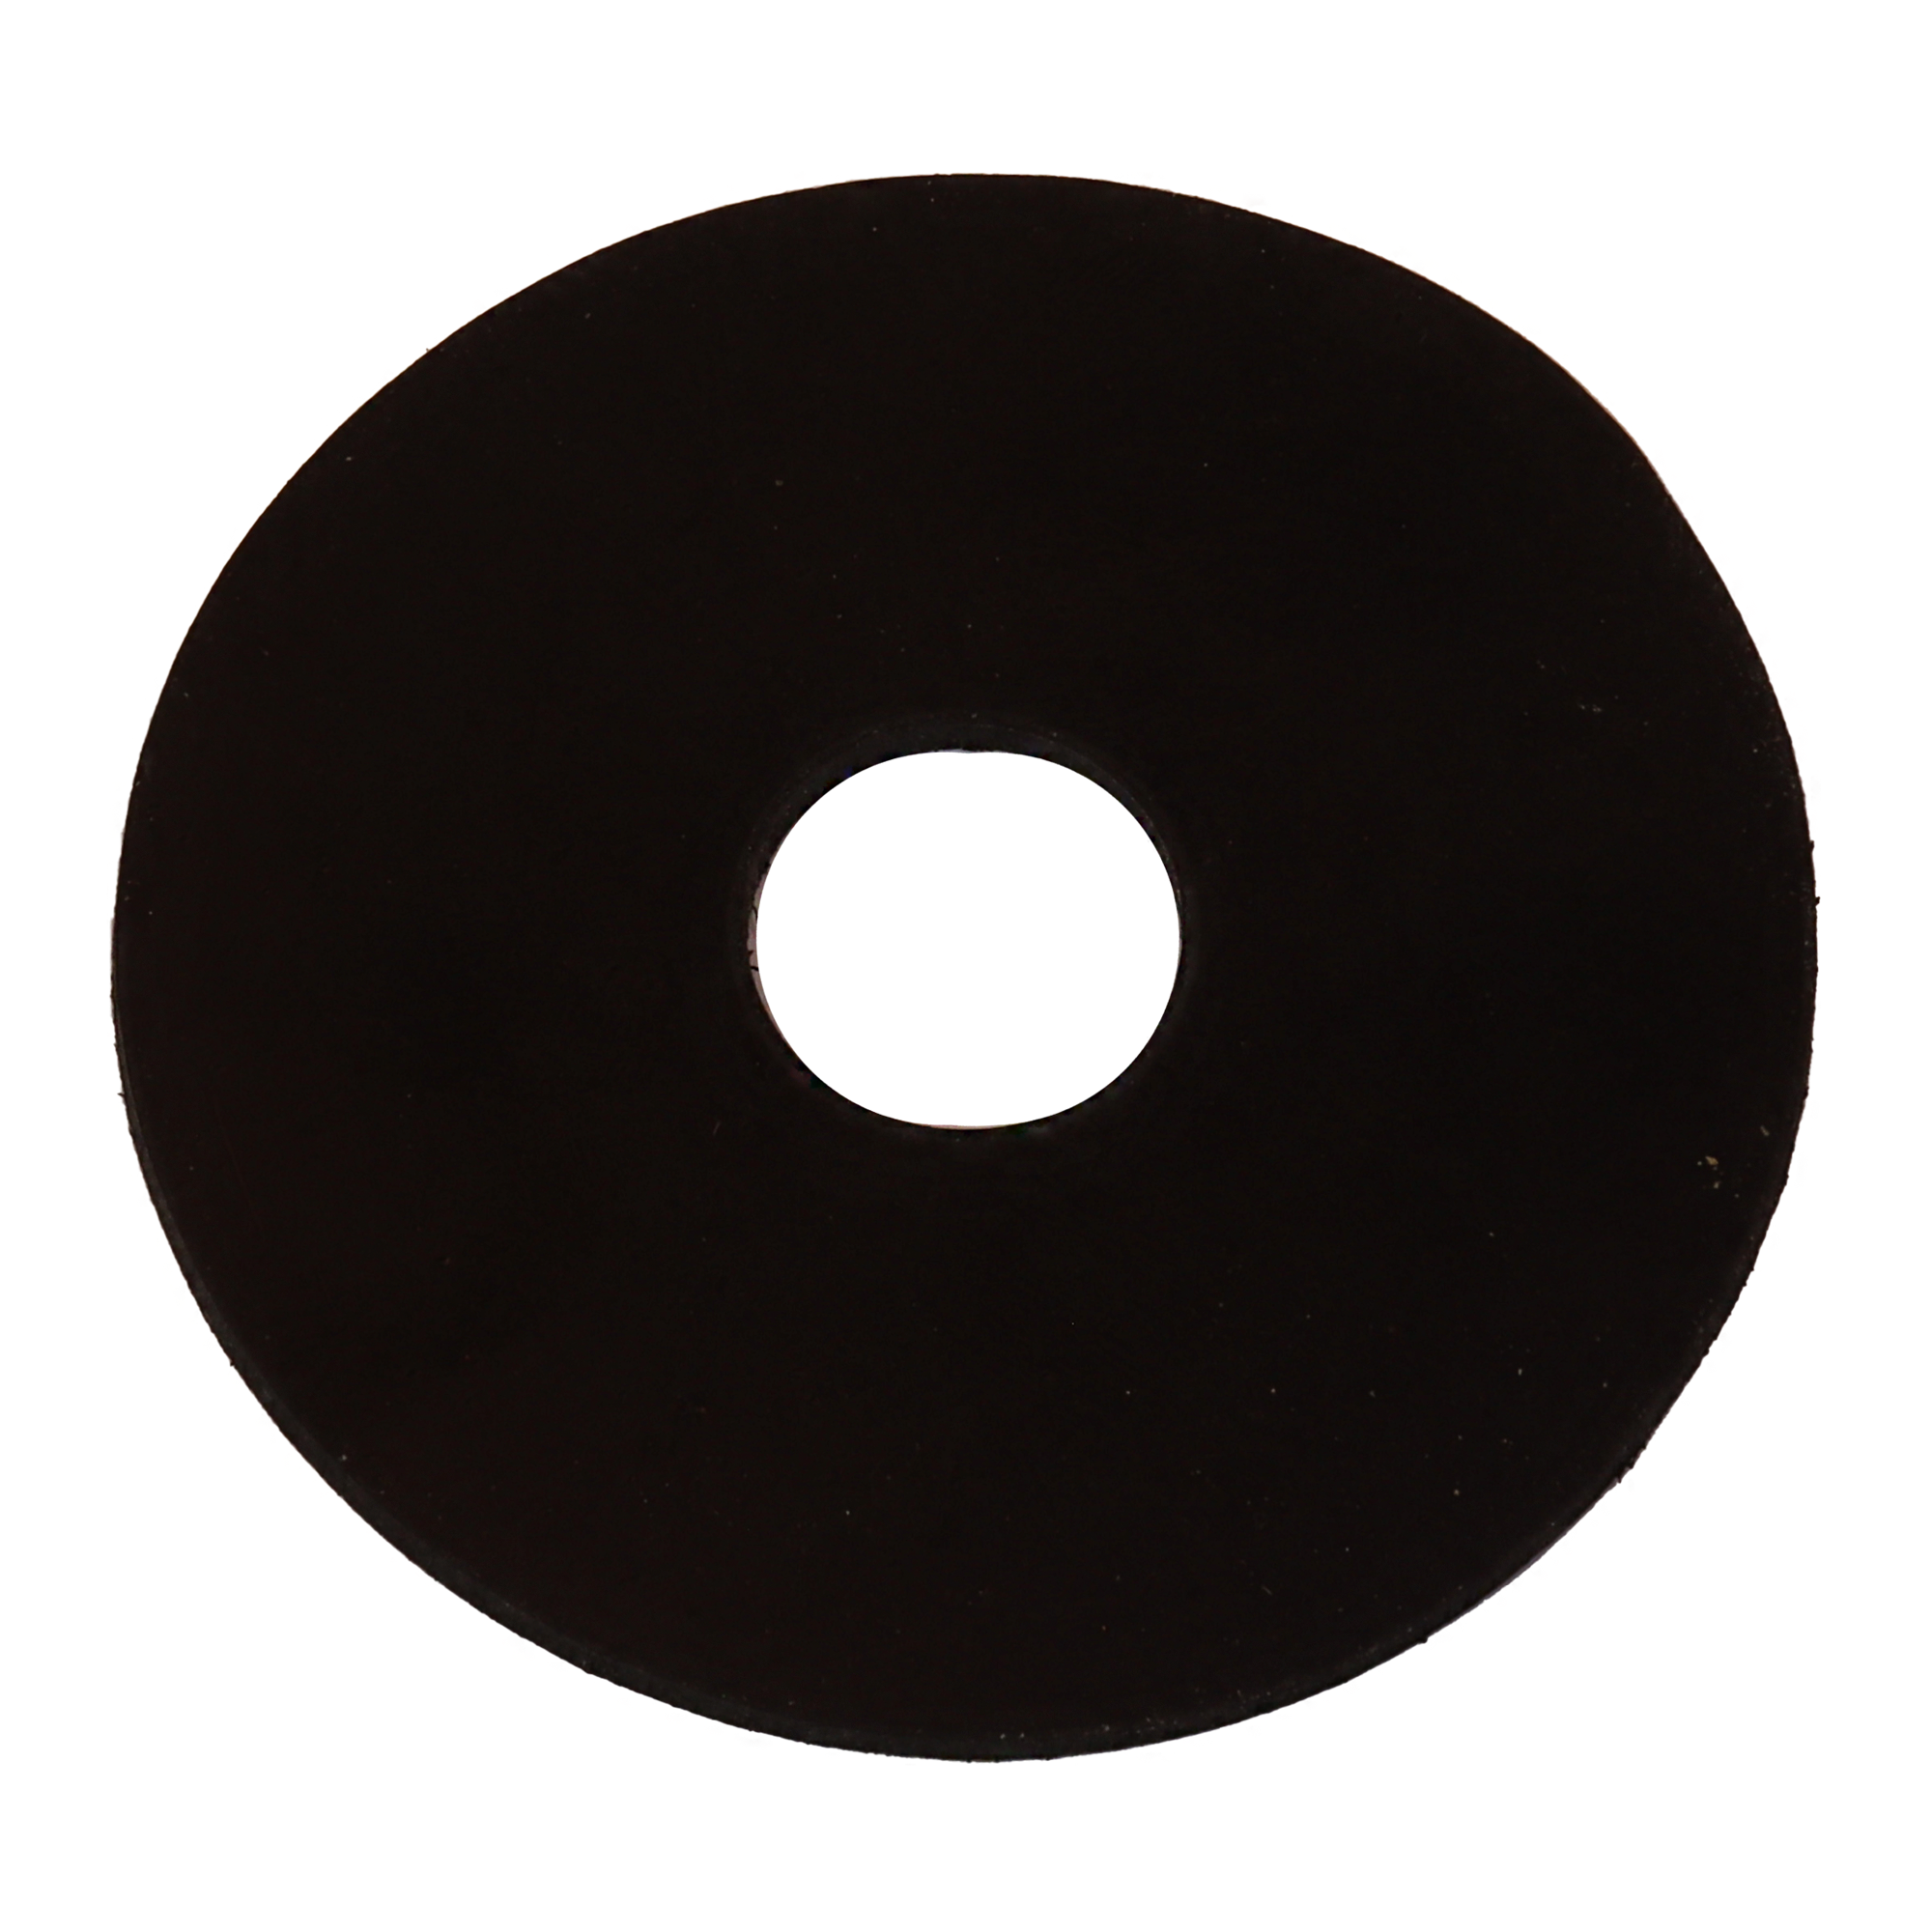 0708a THIN GASKET FOR 1108 & 1118 ADAPTER